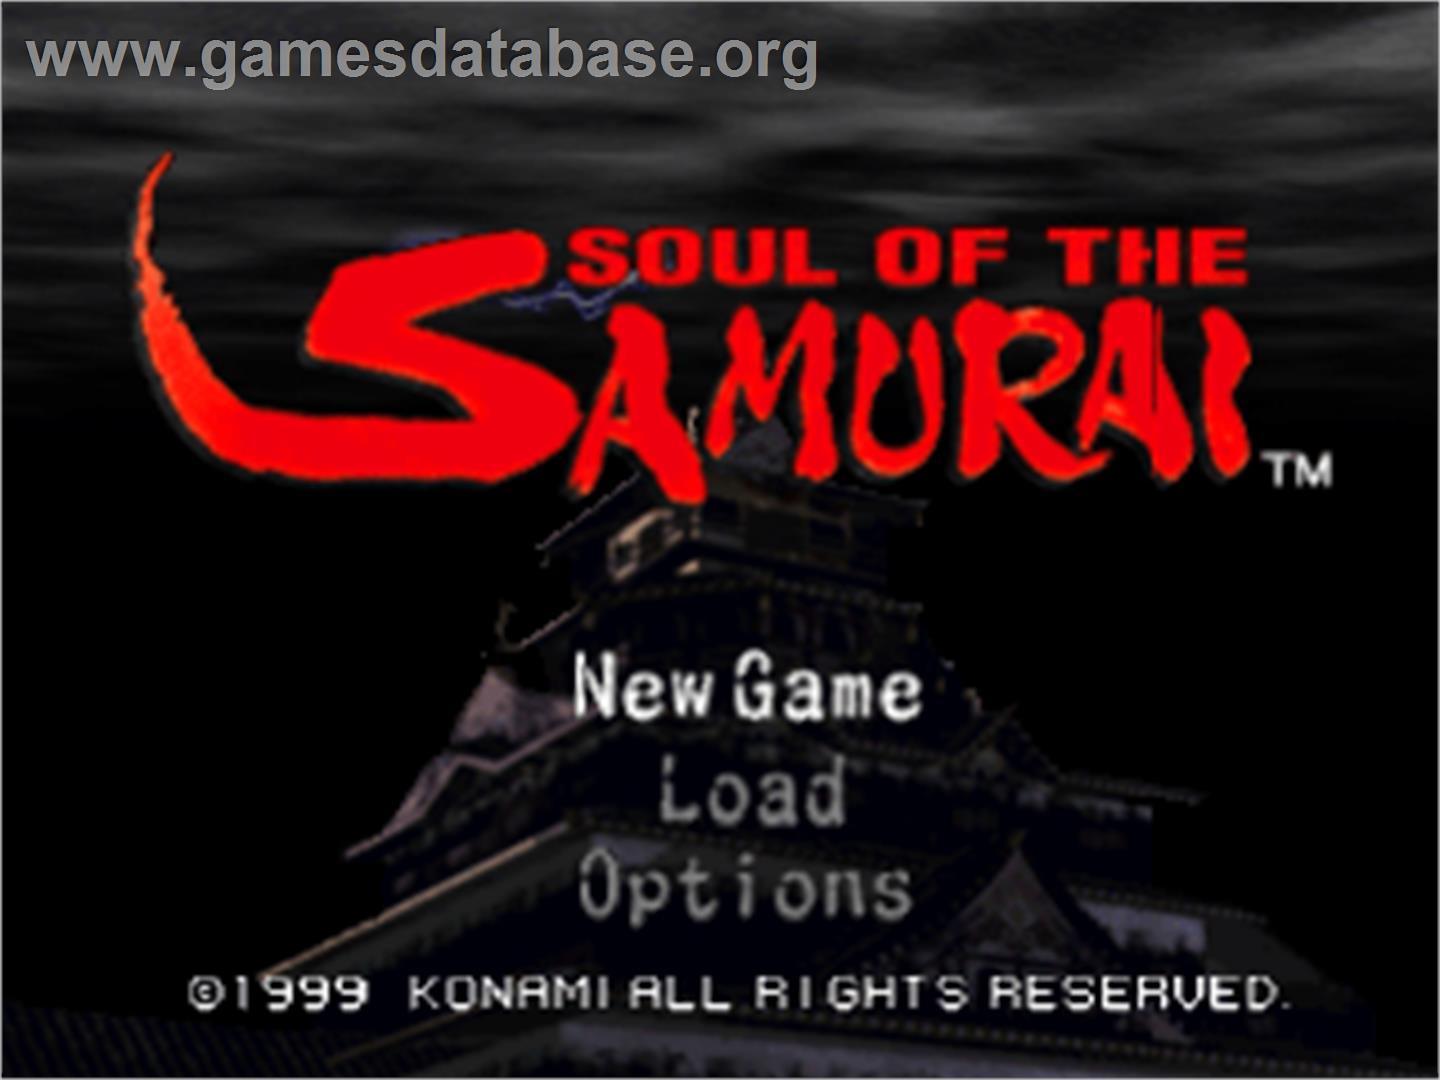 Soul of the Samurai - Sony Playstation - Artwork - Title Screen